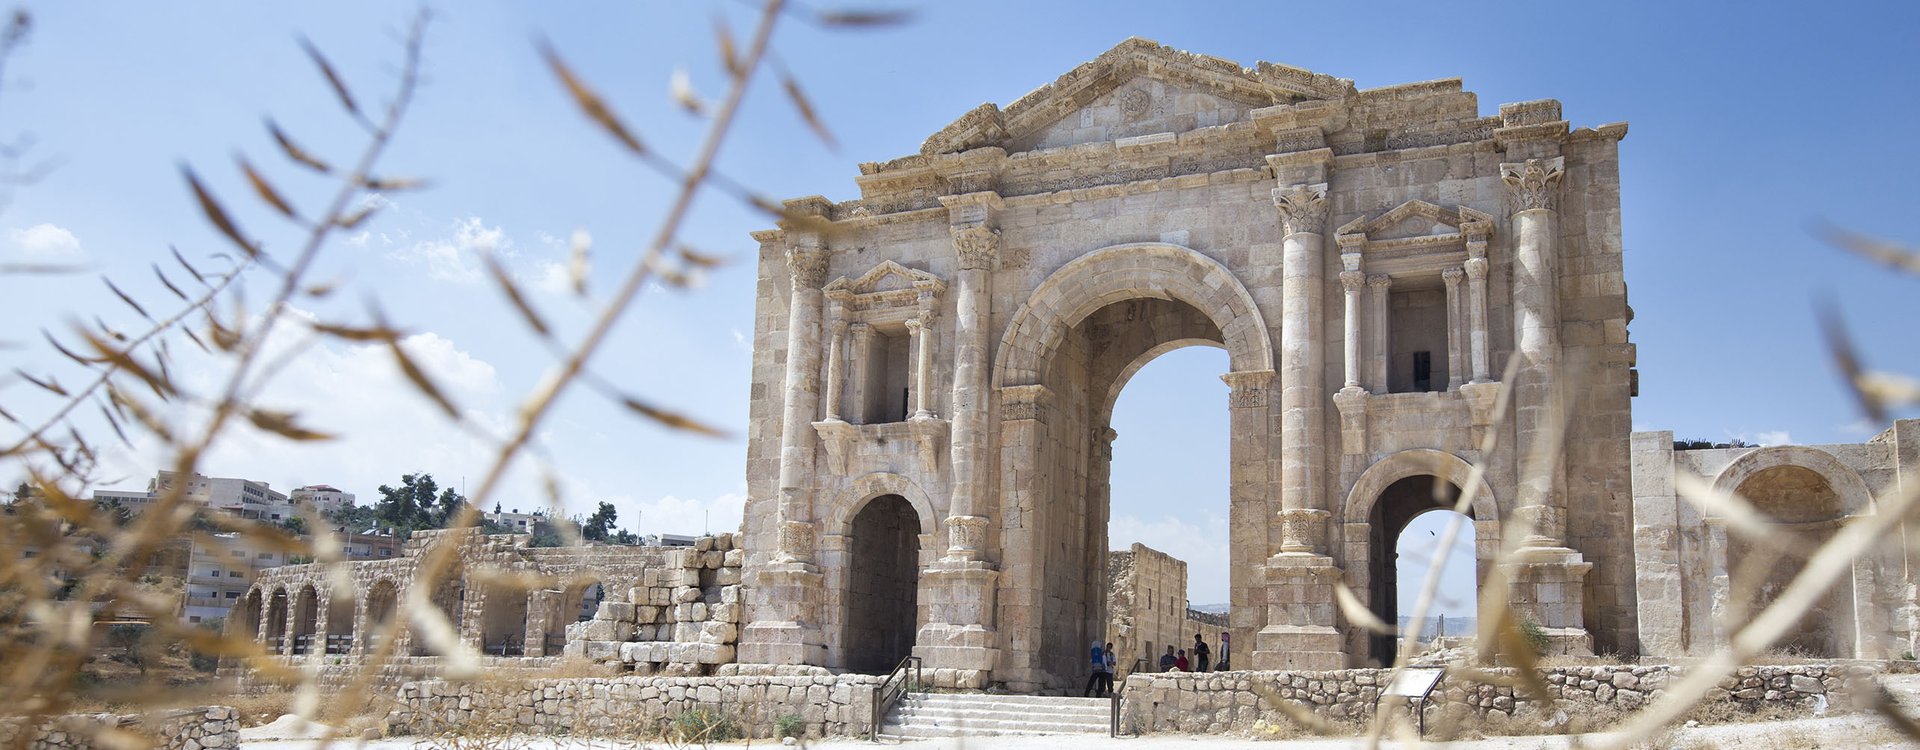 Arch of Hadrian in the ancient Jordanian city of Gerasa, preset-day Jerash, Jordan. It is located about 48 km north of Amman